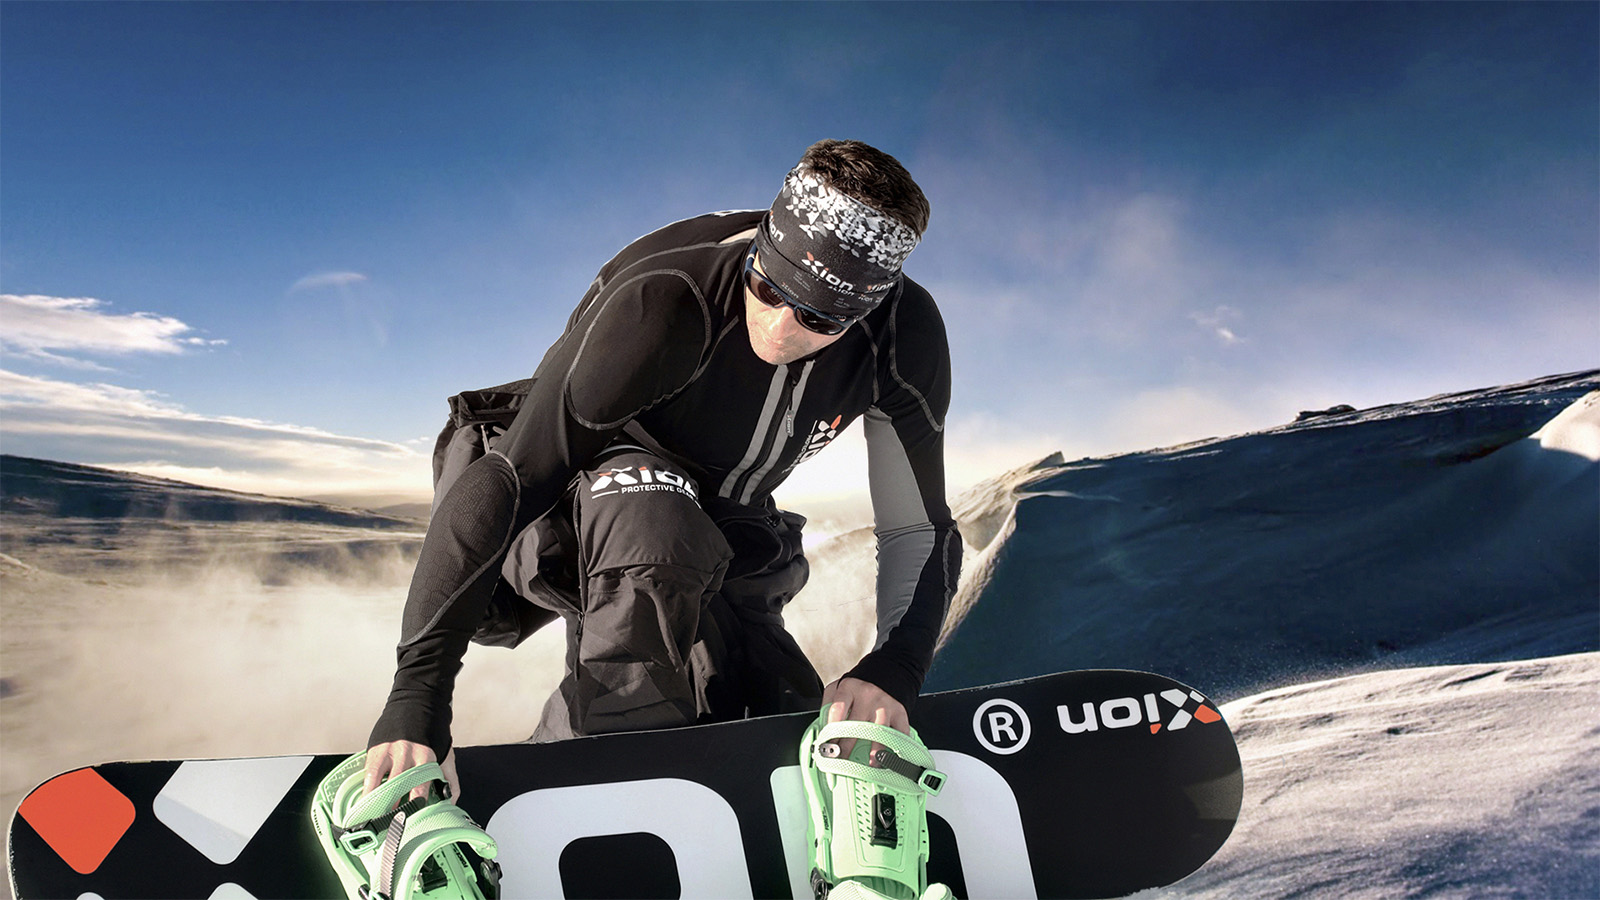 XION 21/22 Snow Protection Preview - Boardsport SOURCE